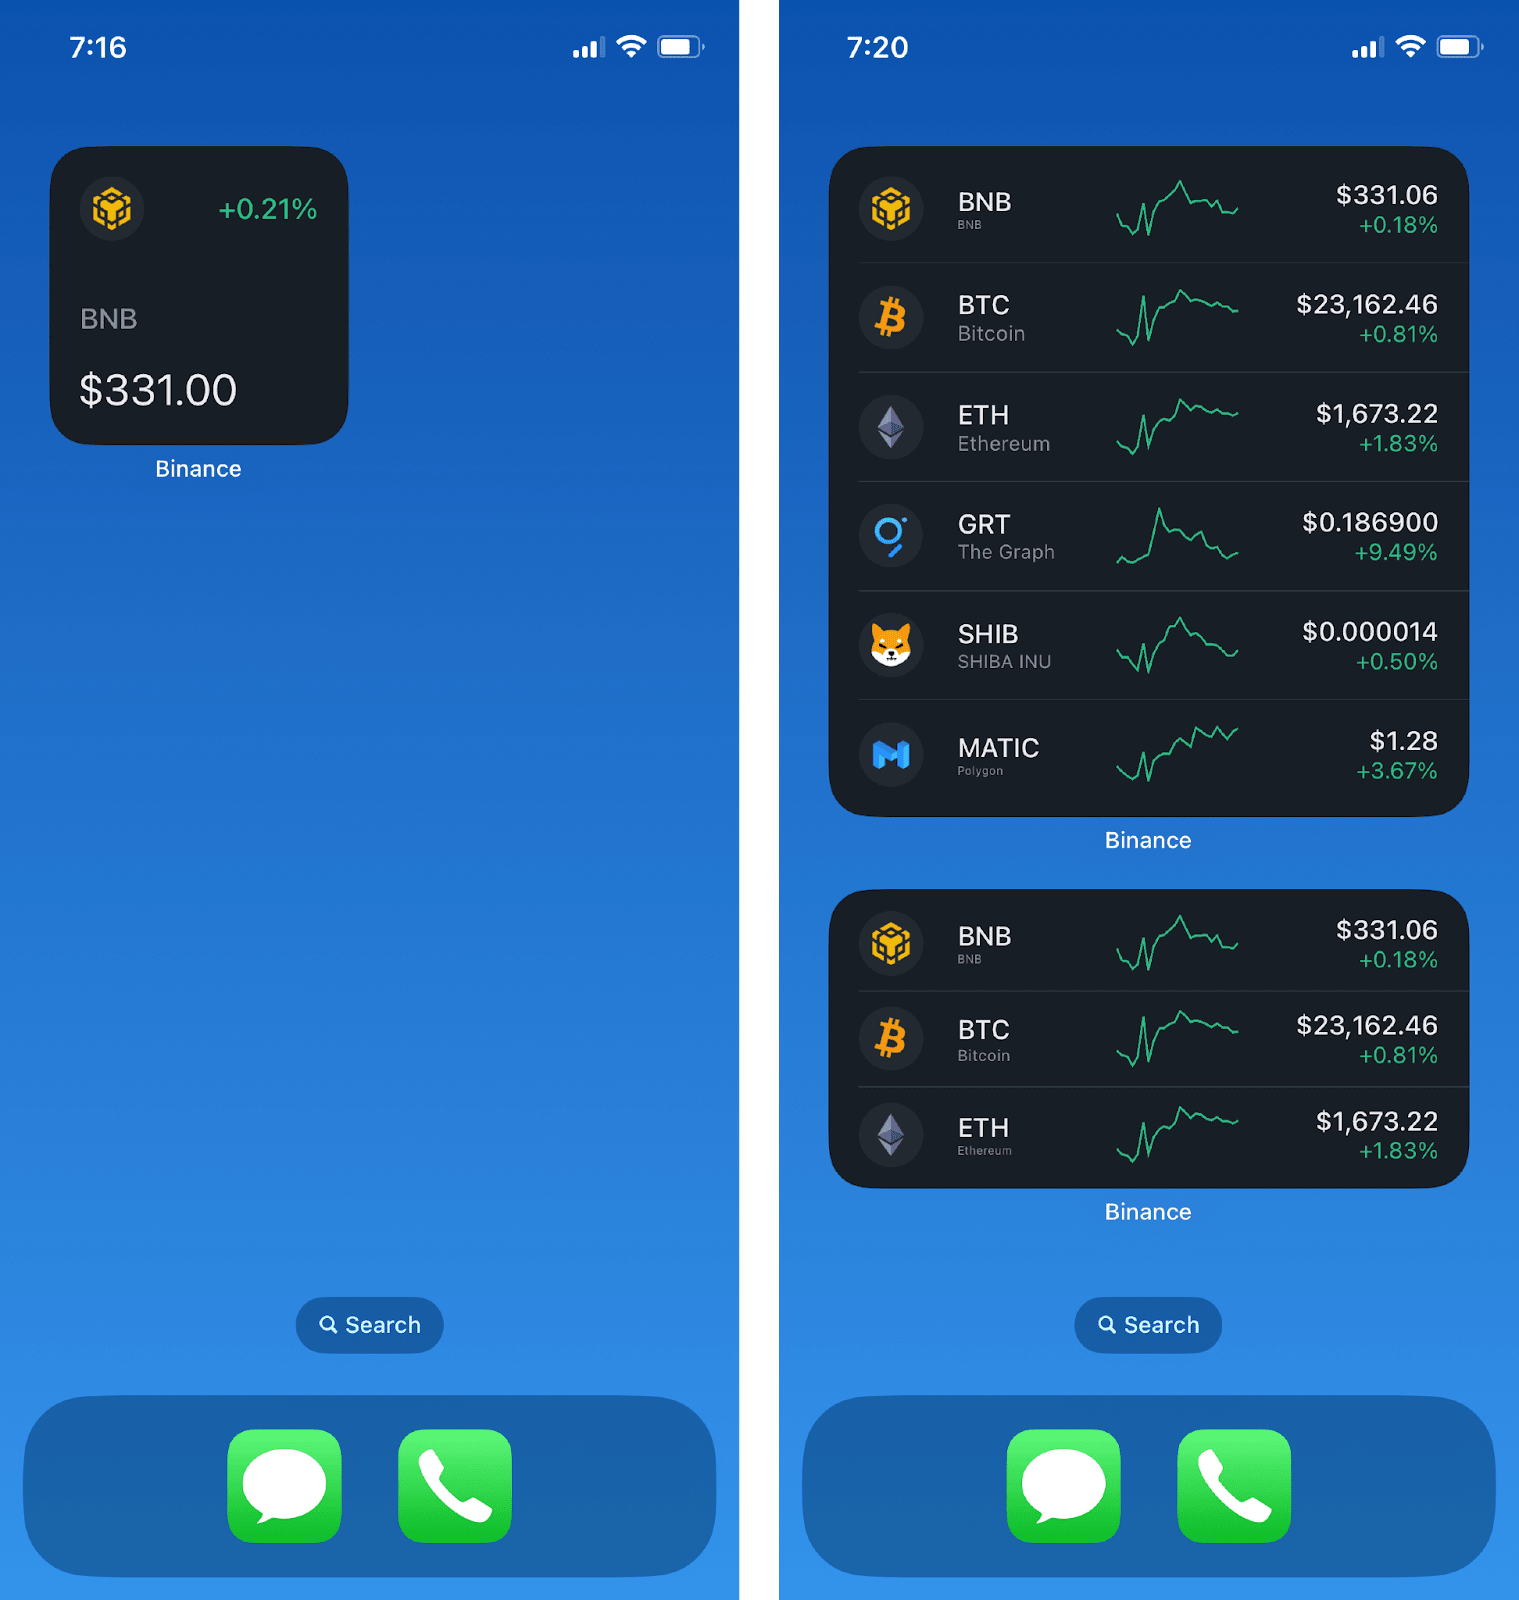 How can I add a widget to my home screen? - The Crypto App